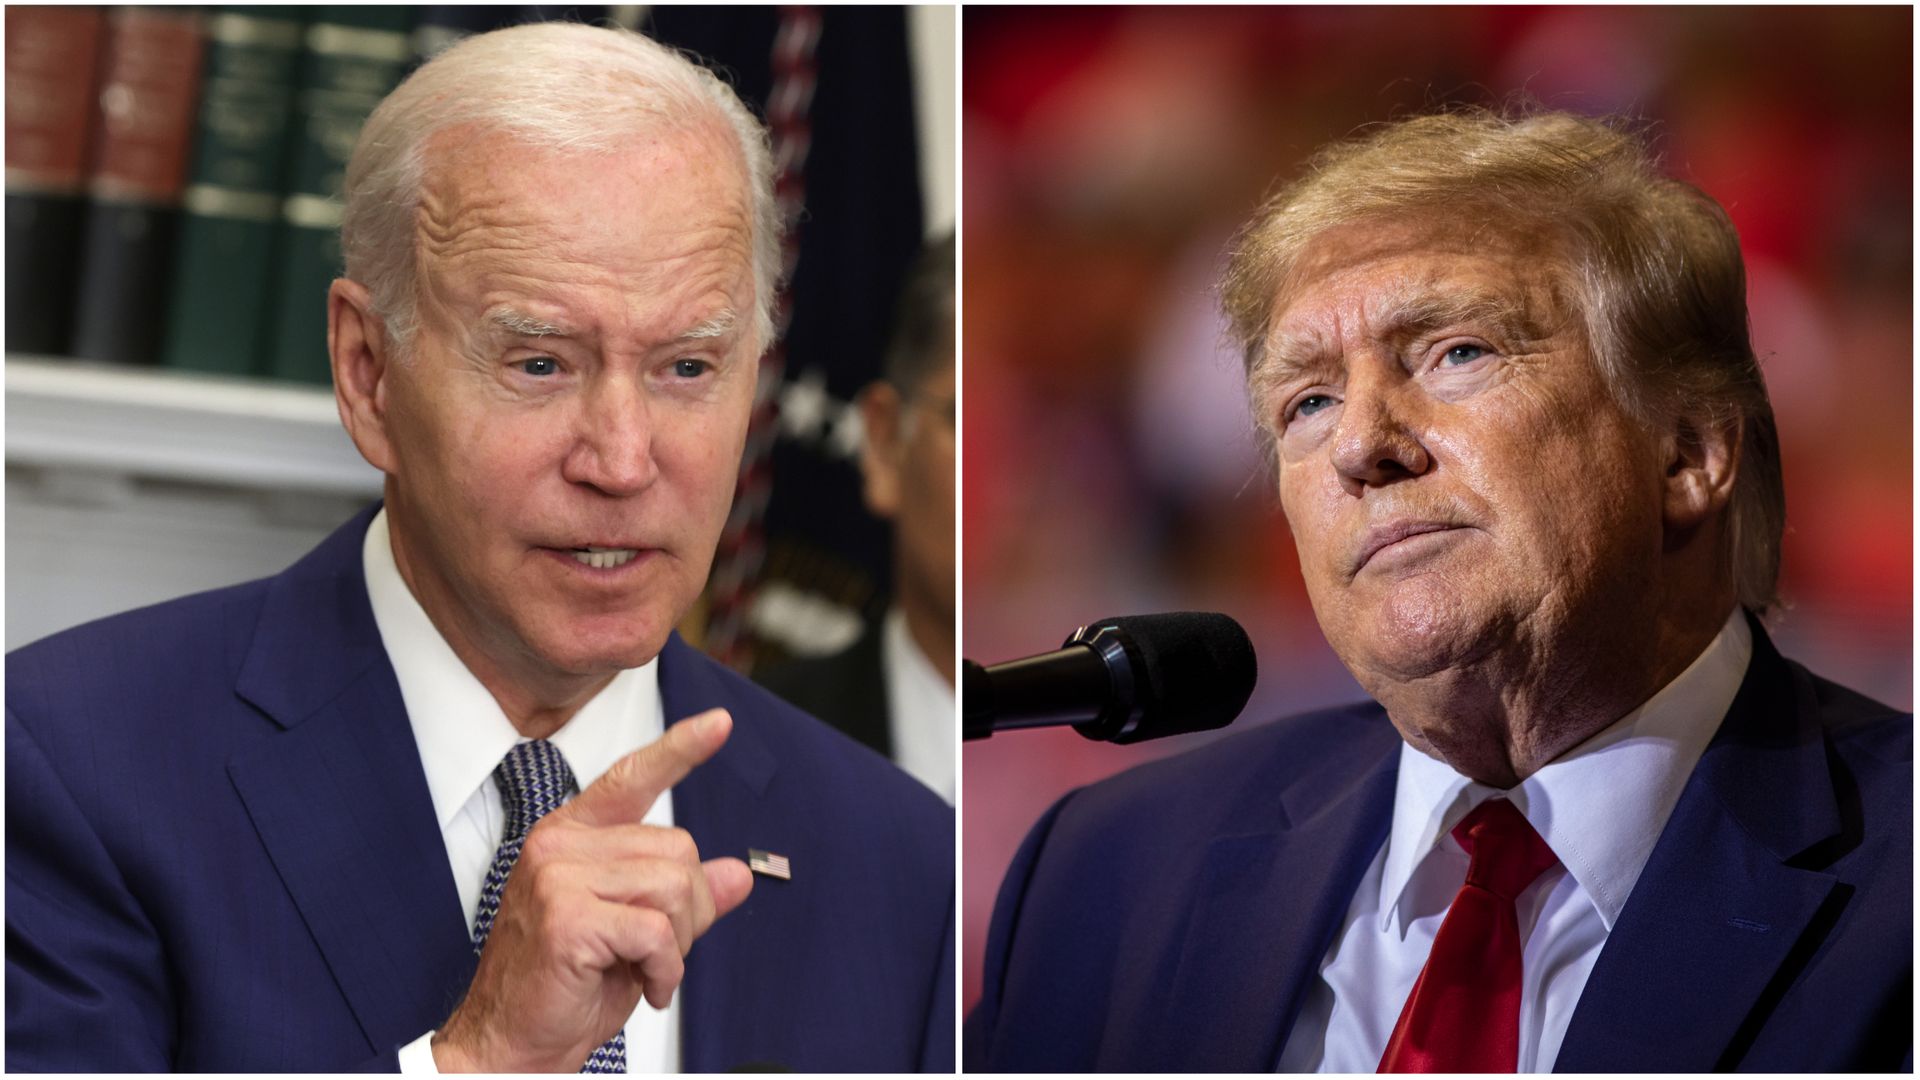 Photo of Joe Biden speaking on the left and Donald Trump looking to the side on the right